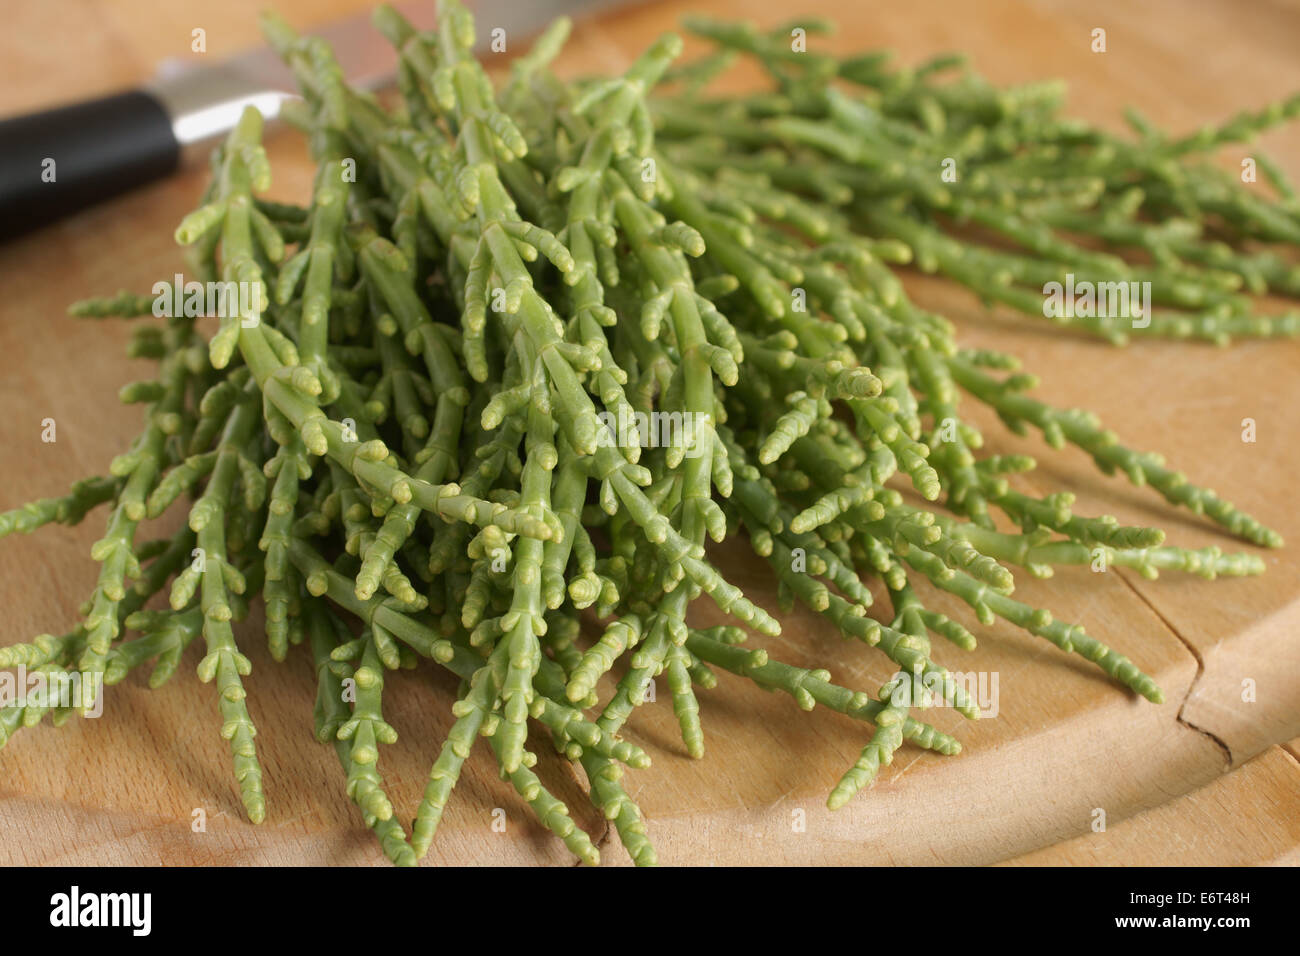 Samphire a coastal herb also known as sea beans glasswort pickleweed or Salicornia Stock Photo